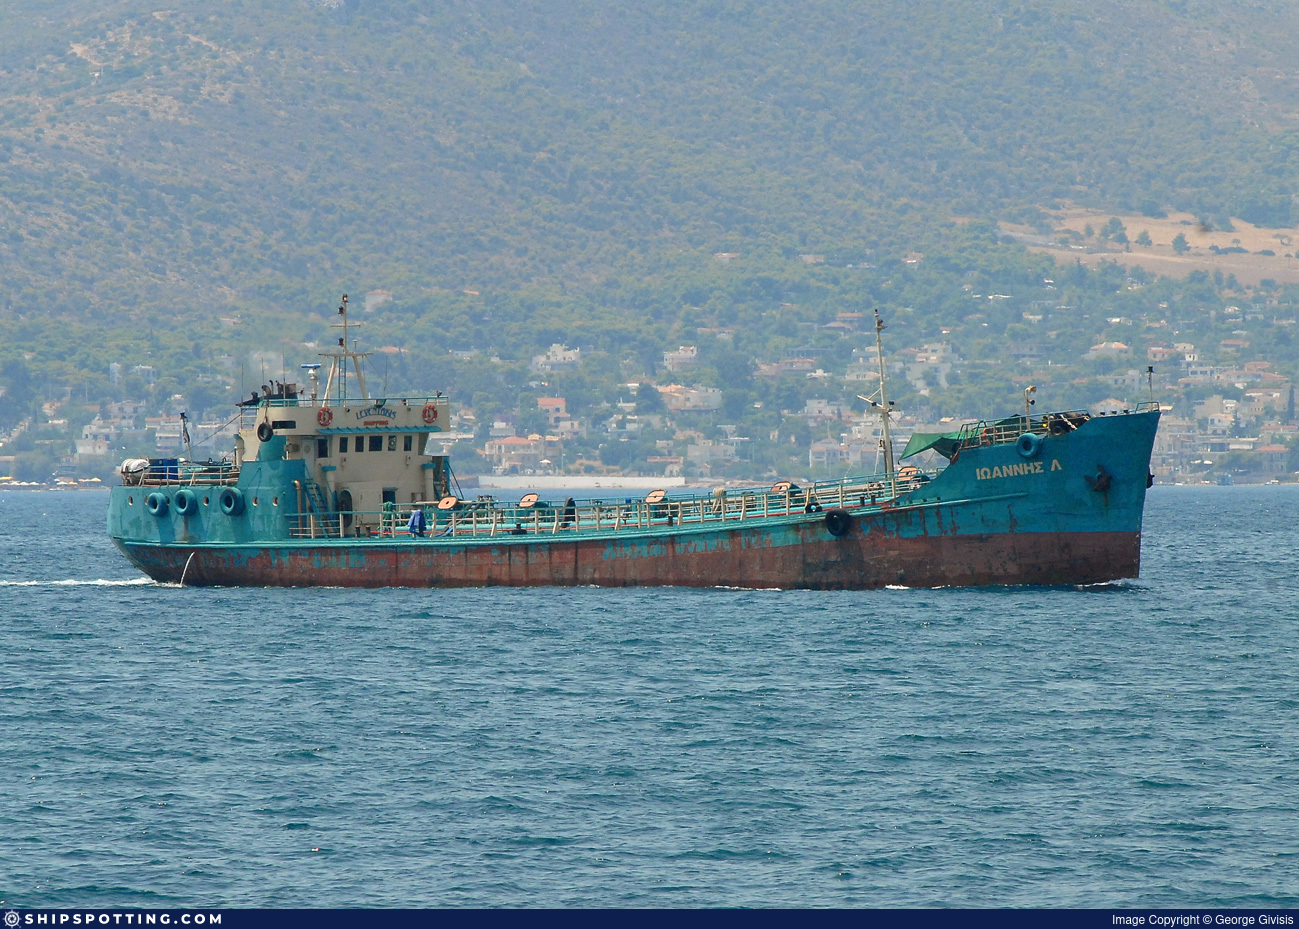 IOANNIS L - IMO 6717227 - ShipSpotting.com - Ship Photos, Information,  Videos and Ship Tracker